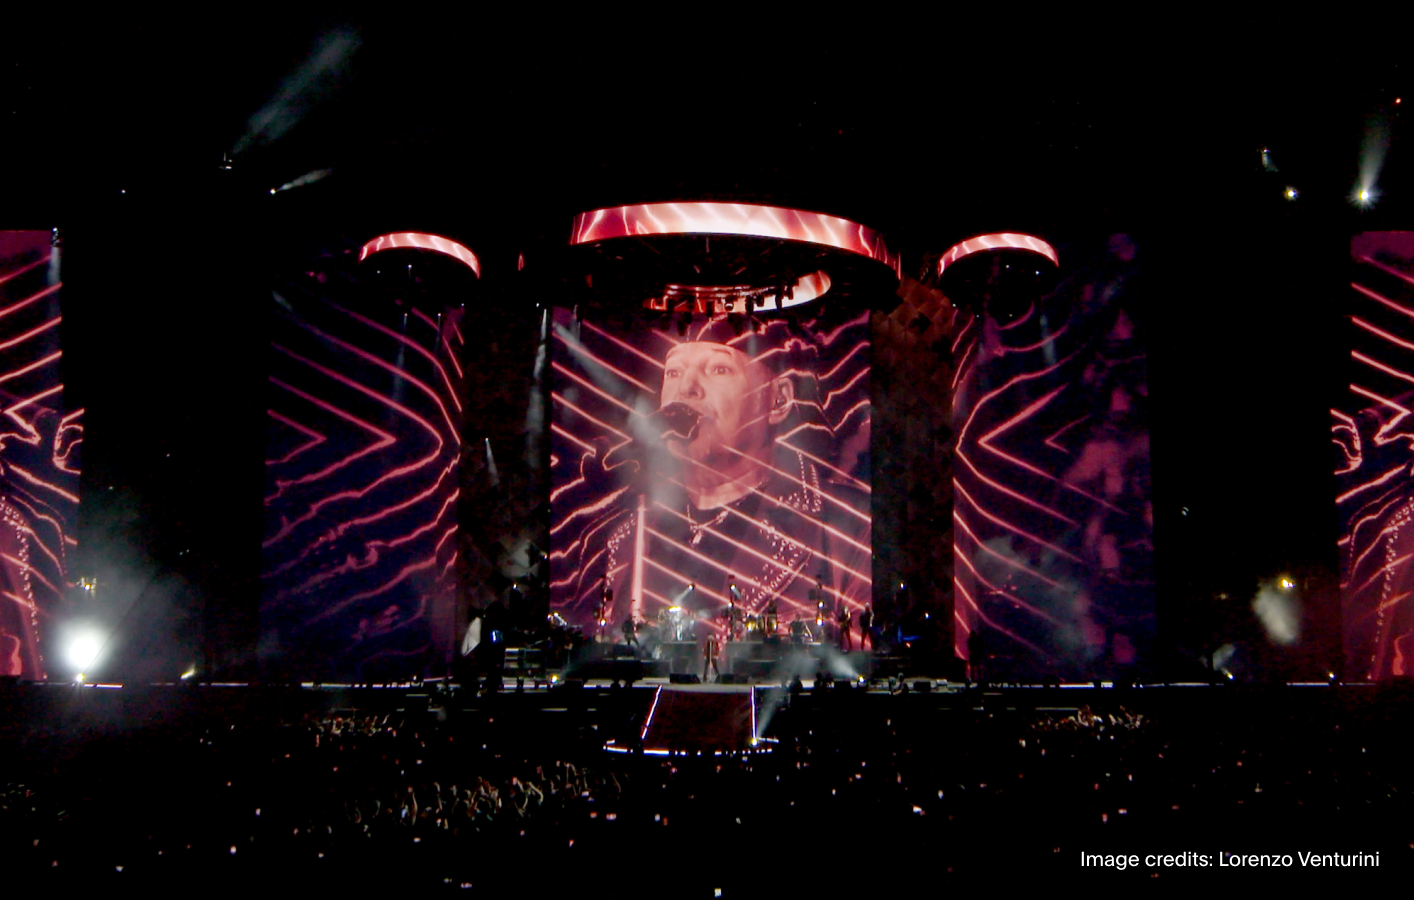 disguise powers real-time effects for Italian rockstar Vasco Rossi's tour